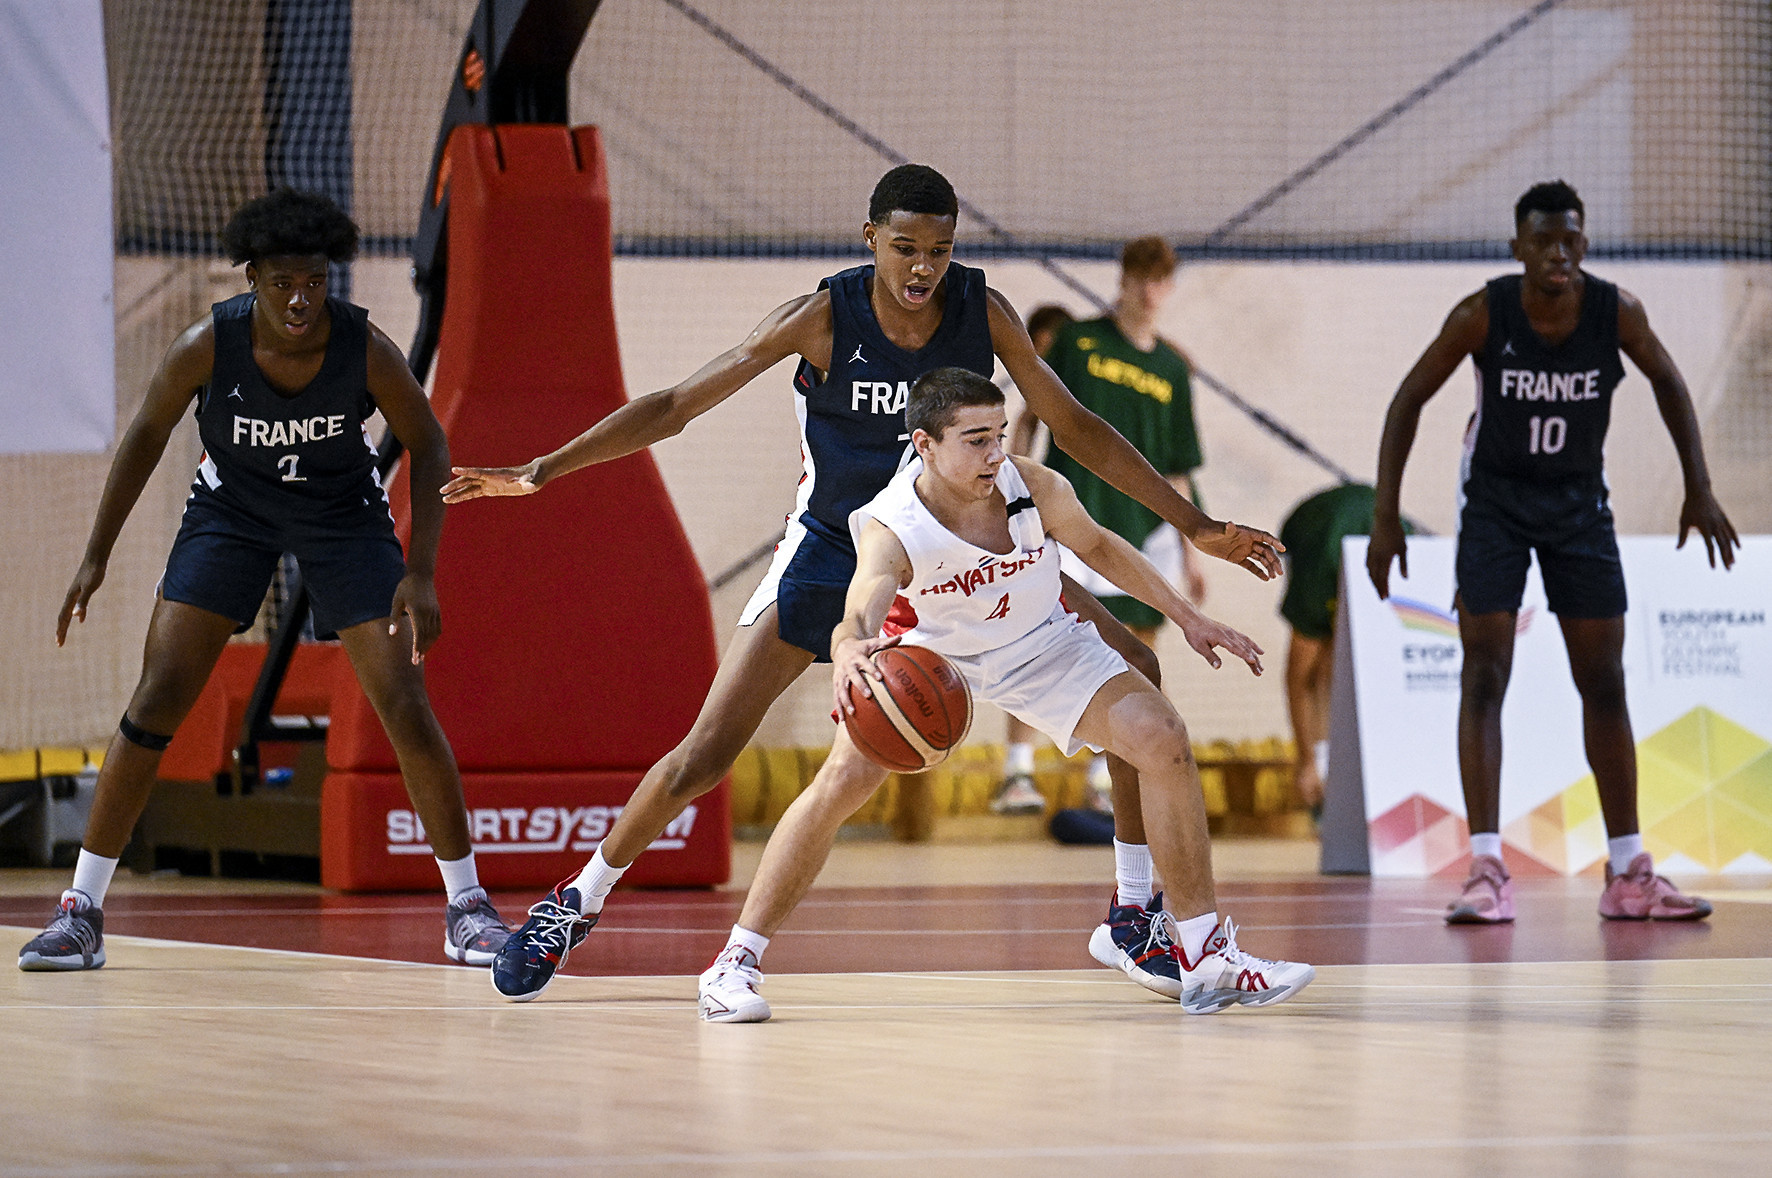 France, one of the pre-tournament favourites in the boys' basketball, got their campaign off to the perfect start with a resounding 80-36 victory over Croatia ©EOC